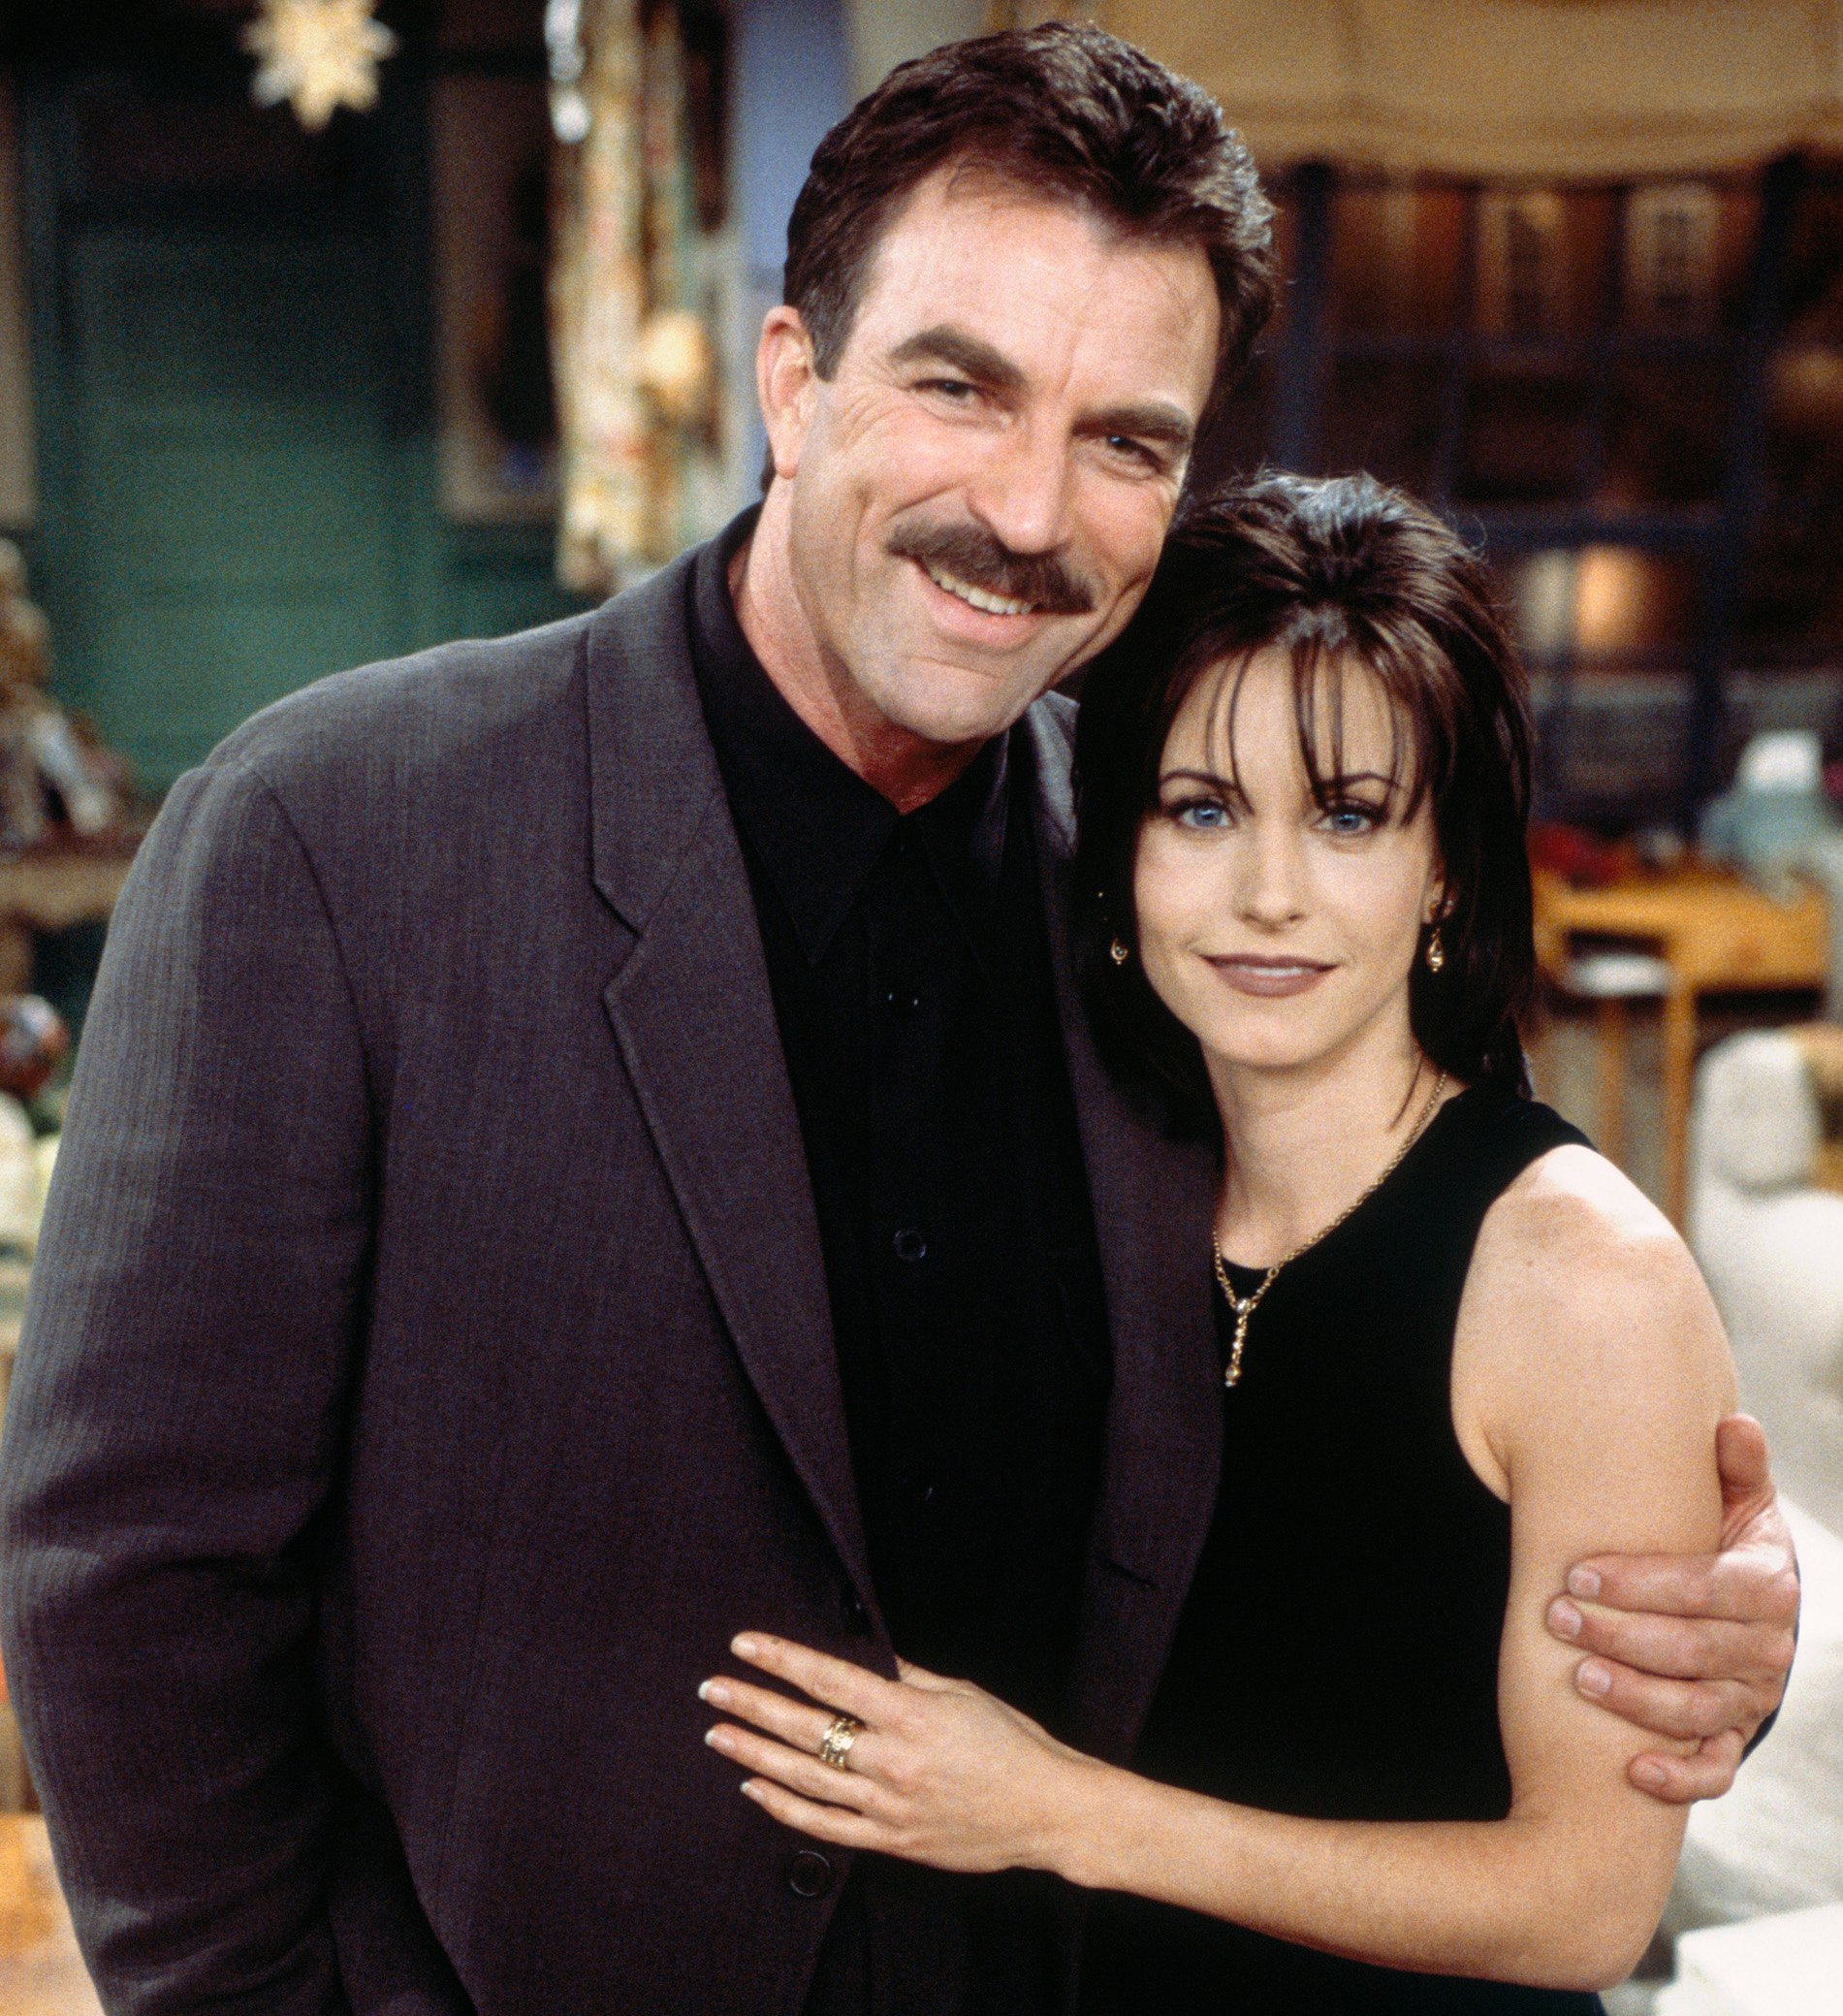 'Friends': How Old Was Tom Selleck When He First Appeared on the Show?